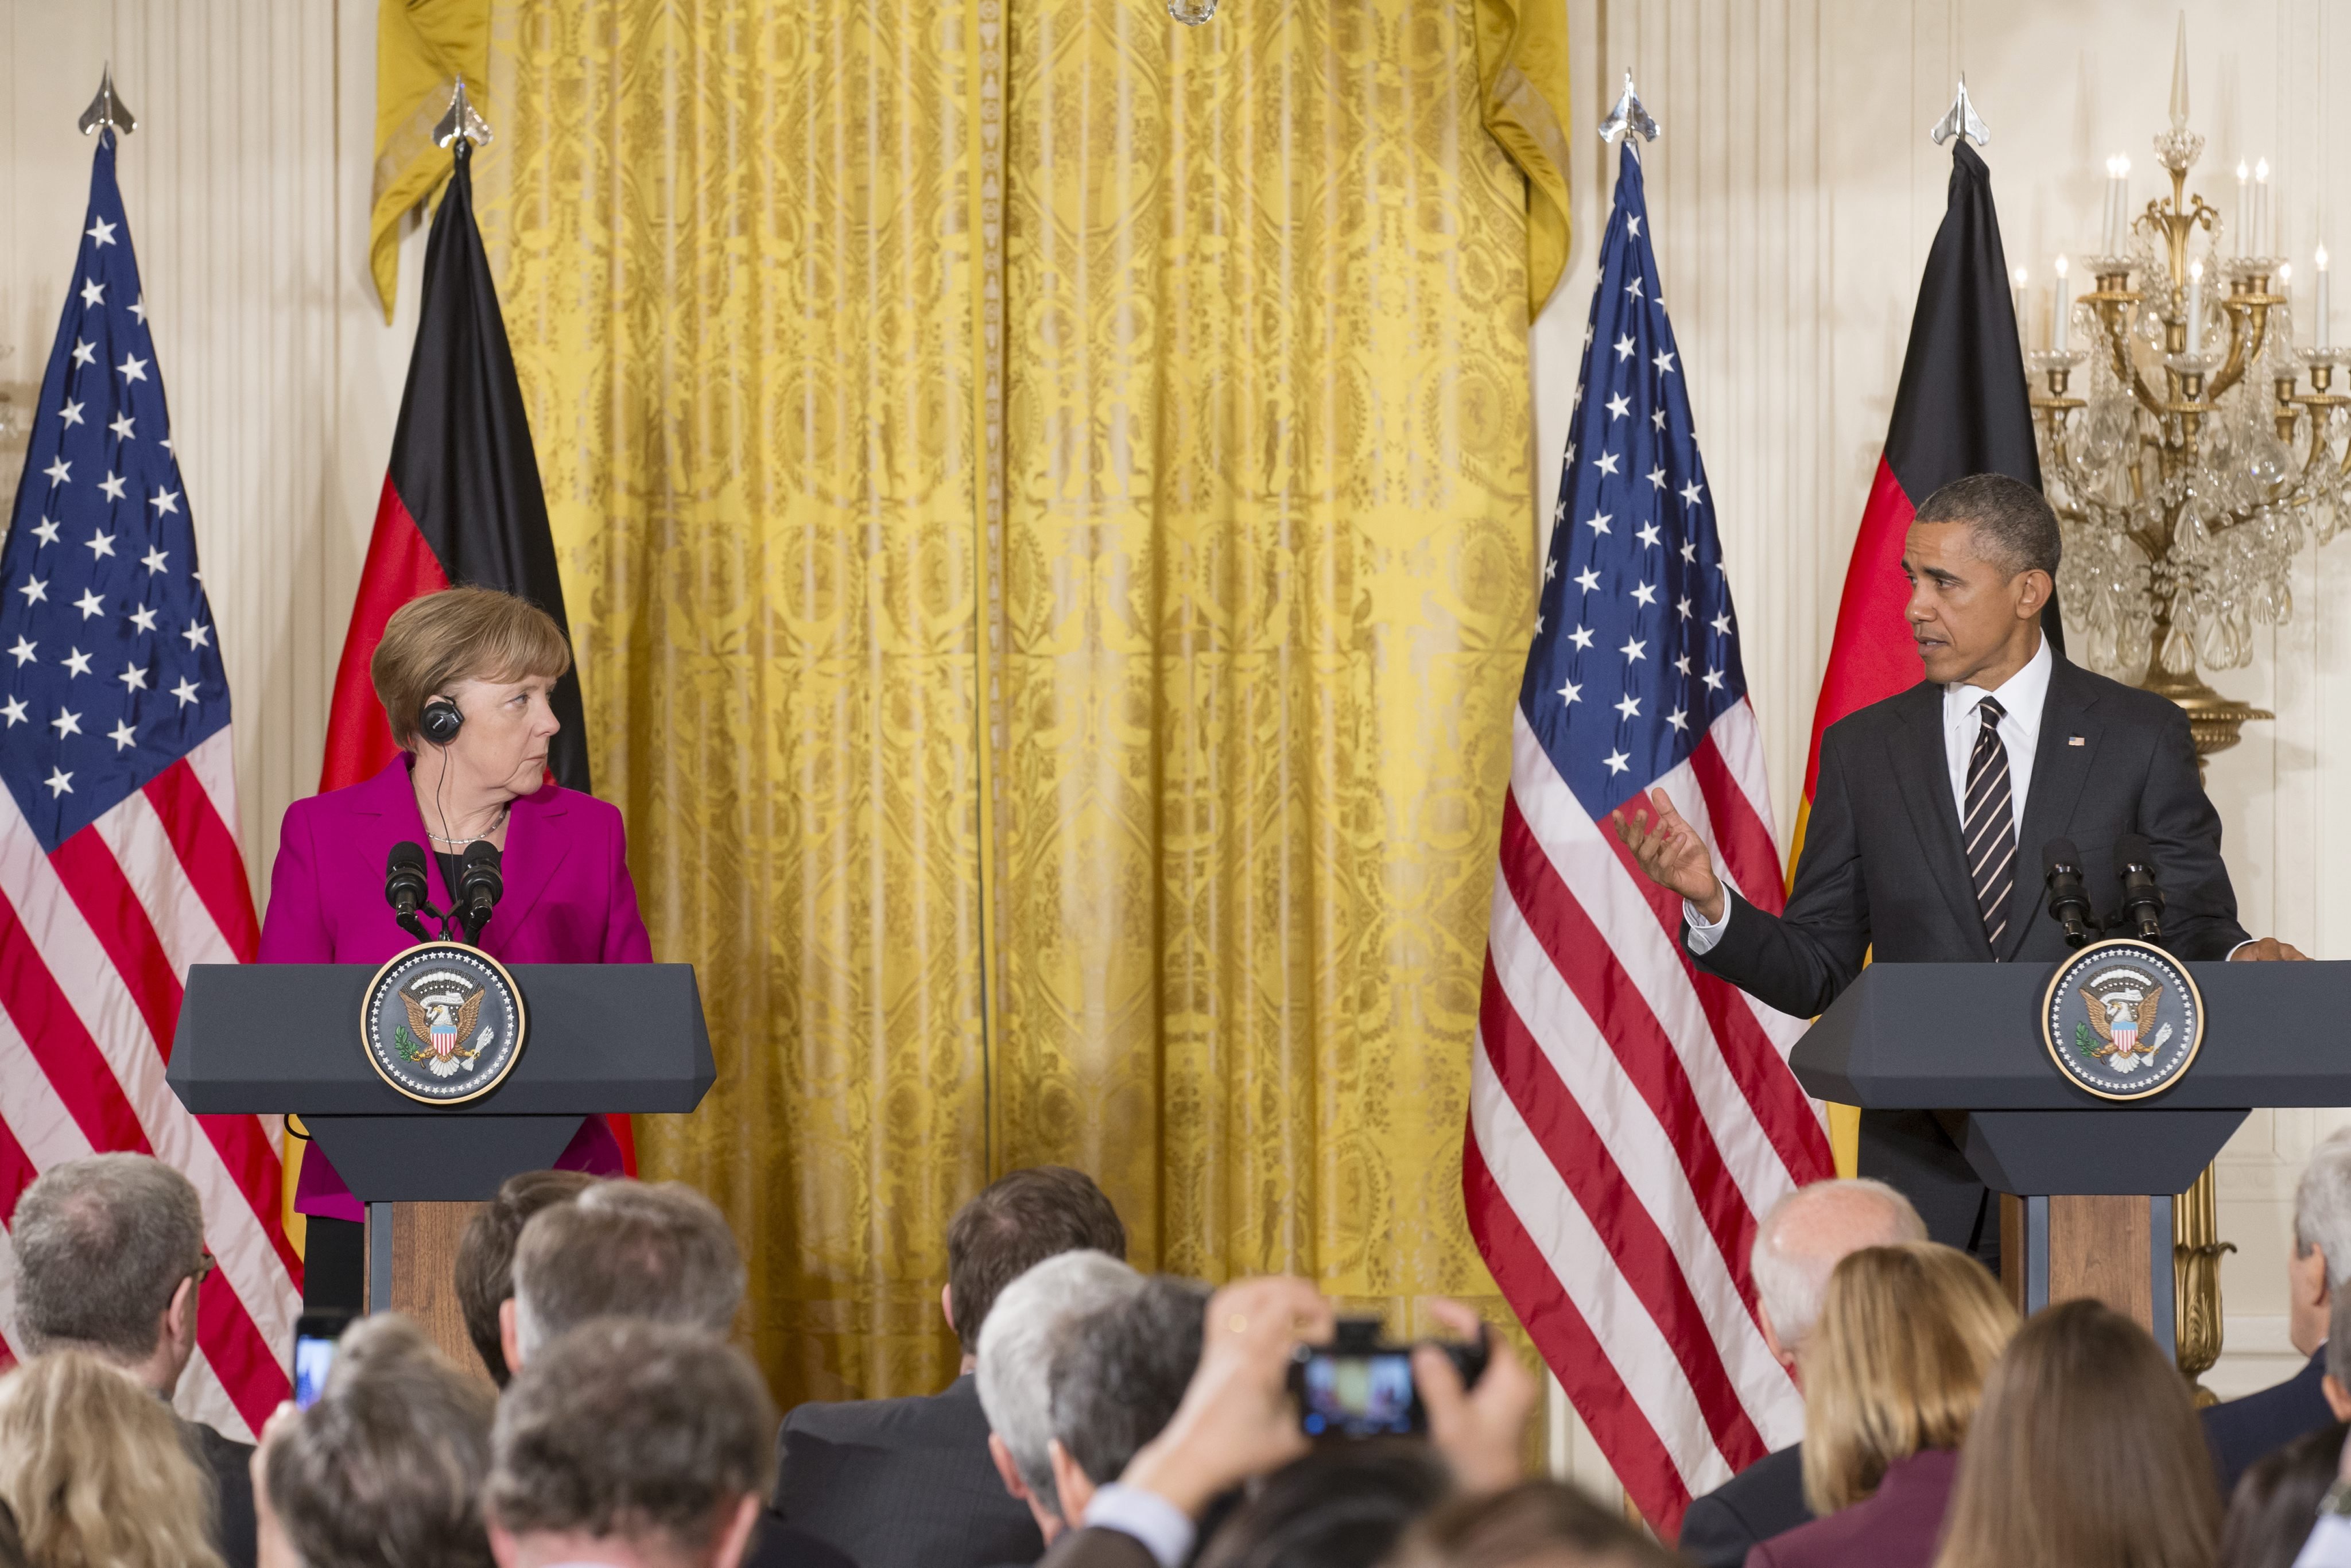 From Left: Chancellor of Germany Angela Merkel and President Barack Obama hold a joint news conference in the East Room of the White House in Washington D.C. on Feb. 9, 2015. (Michael Reynolds—EPA)